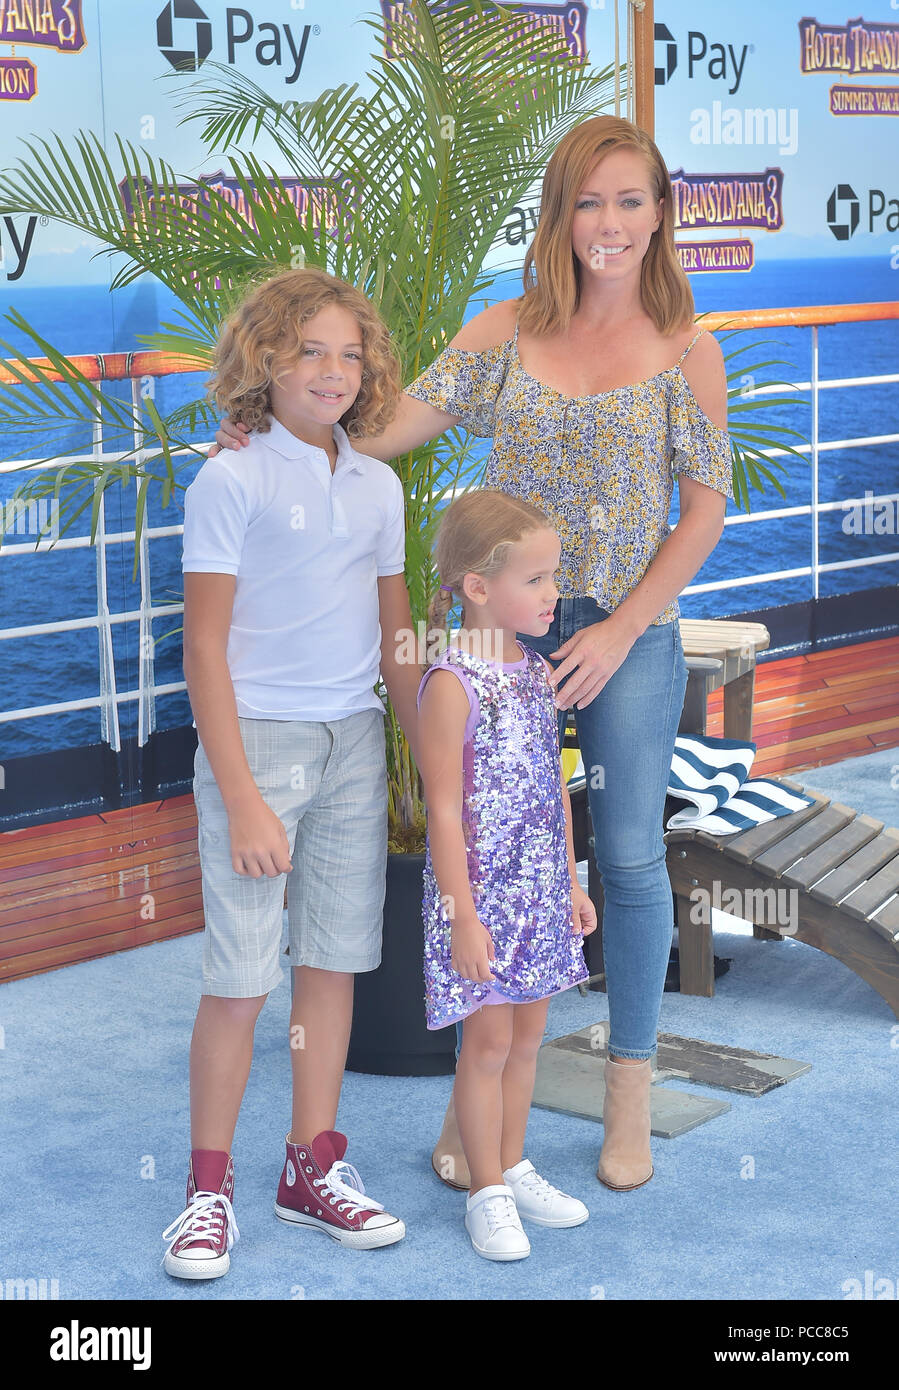 Columbia Pictures And Sony Pictures Animation's World Premiere Of 'Hotel Transylvania 3: Summer Vacation'  Featuring: Kendra Wilkinson, Hank Baskett IV, Alijah Mary Baskett Where: Westwood, California, United States When: 30 Jun 2018 Credit: FayesVision/WENN.com Stock Photo